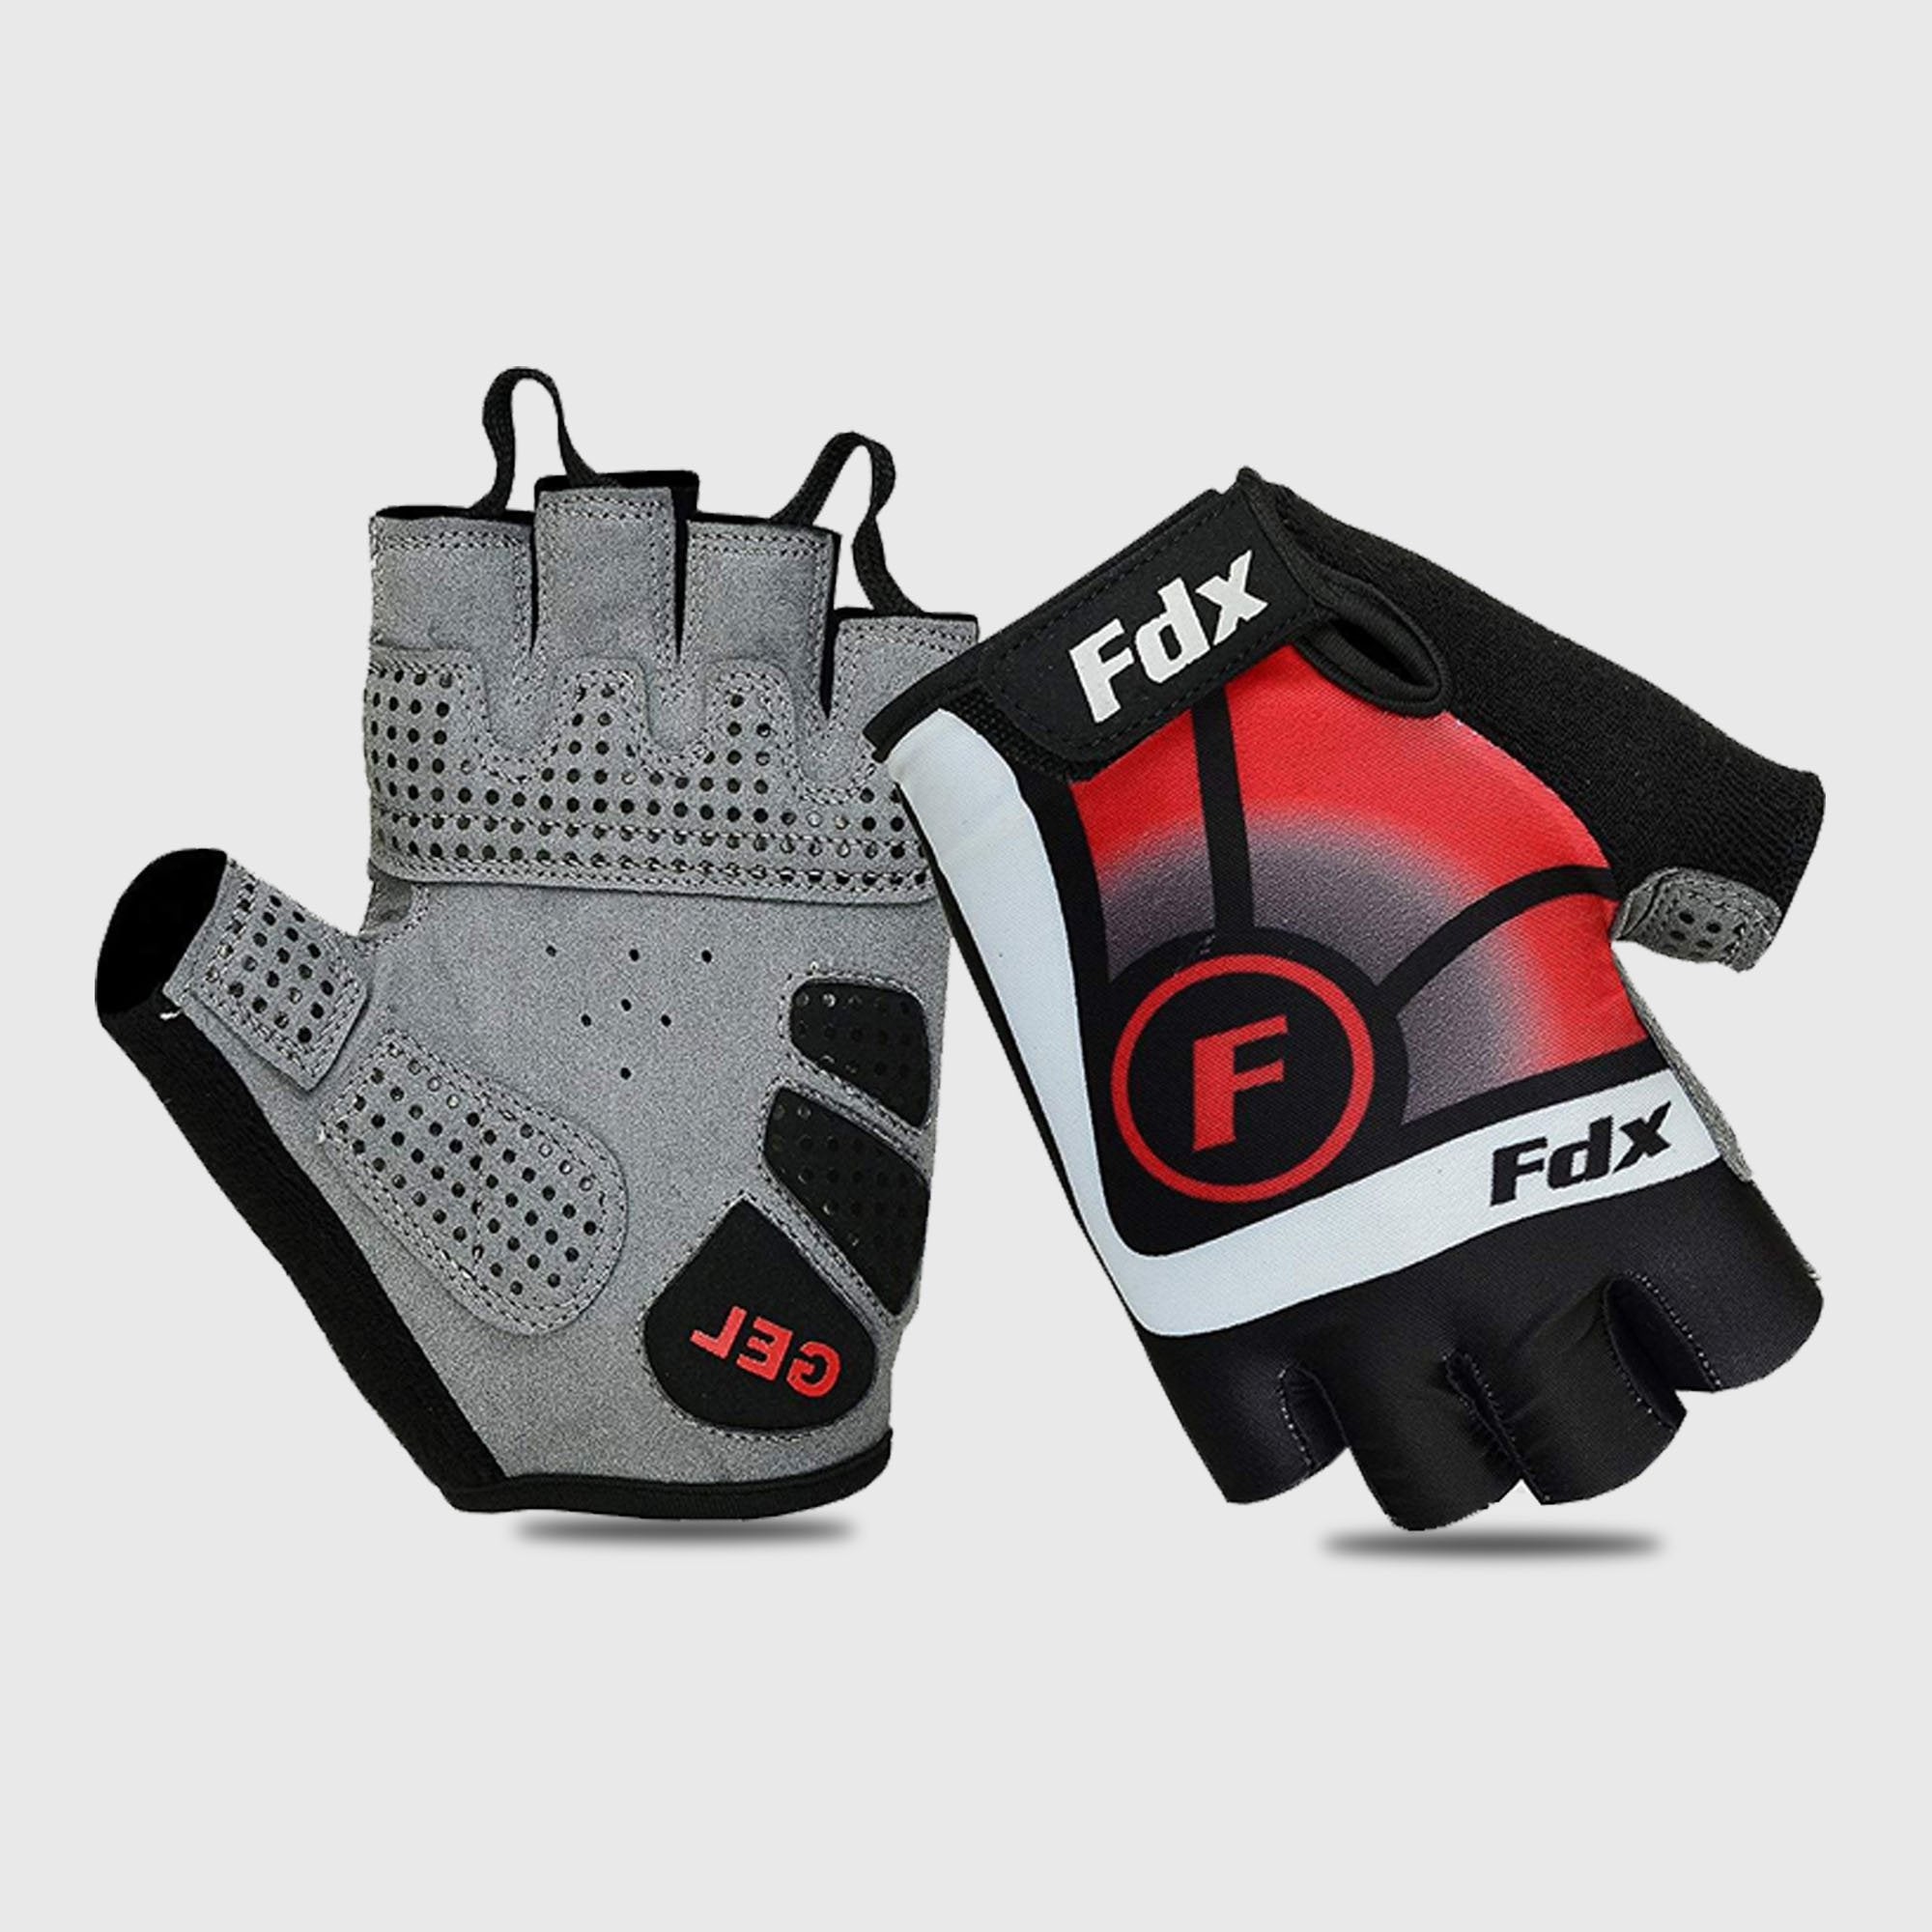 Fdx Signature Red Gel Padded Short Finger Summer Cycling Gloves